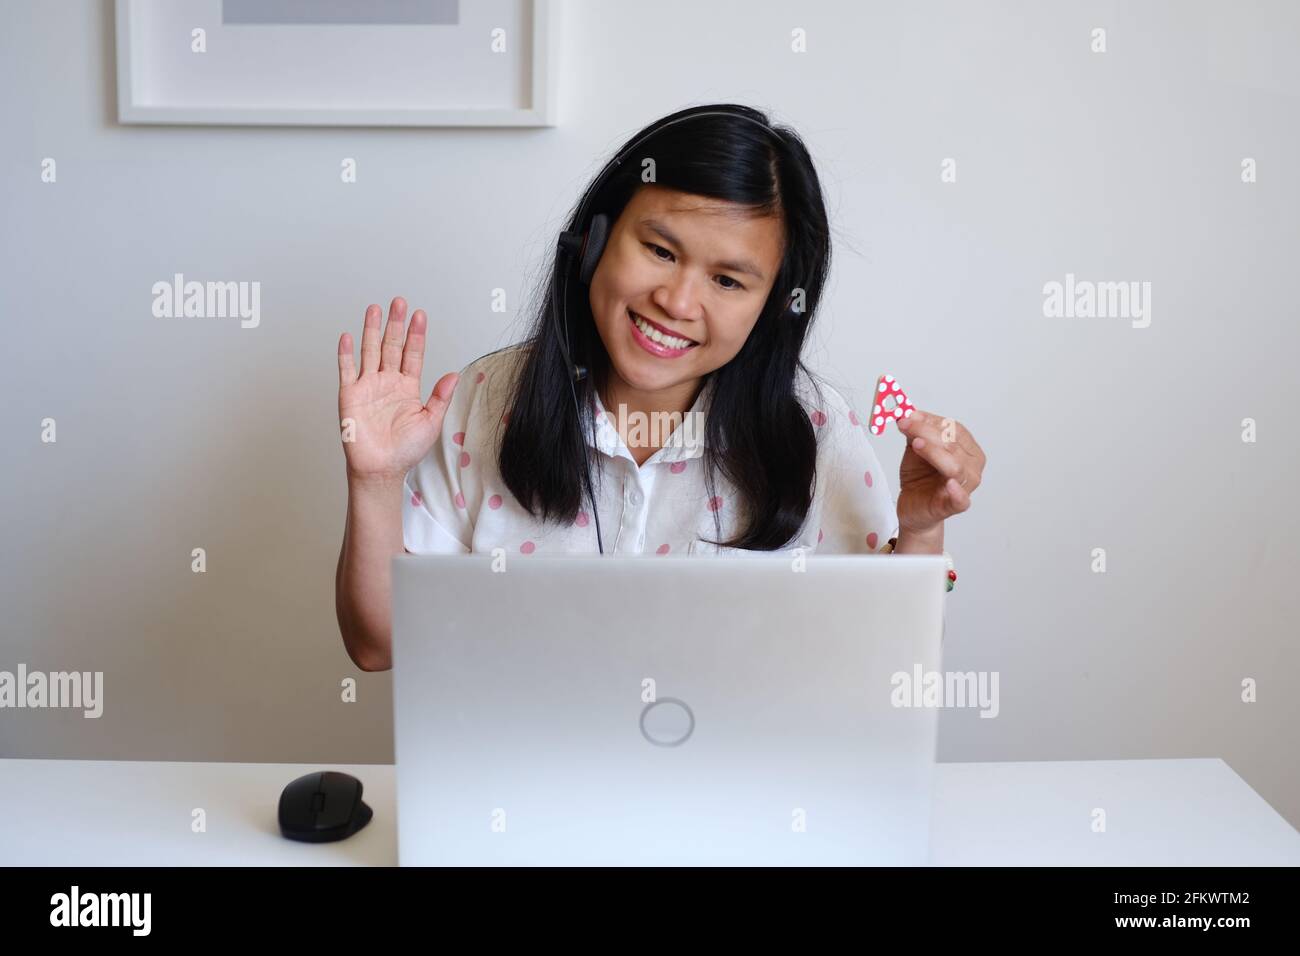 Filipino filipina Asian woman or girl teacher working sitting in front of a white desk and silver computer, teaching a lesson online on the Internet Stock Photo